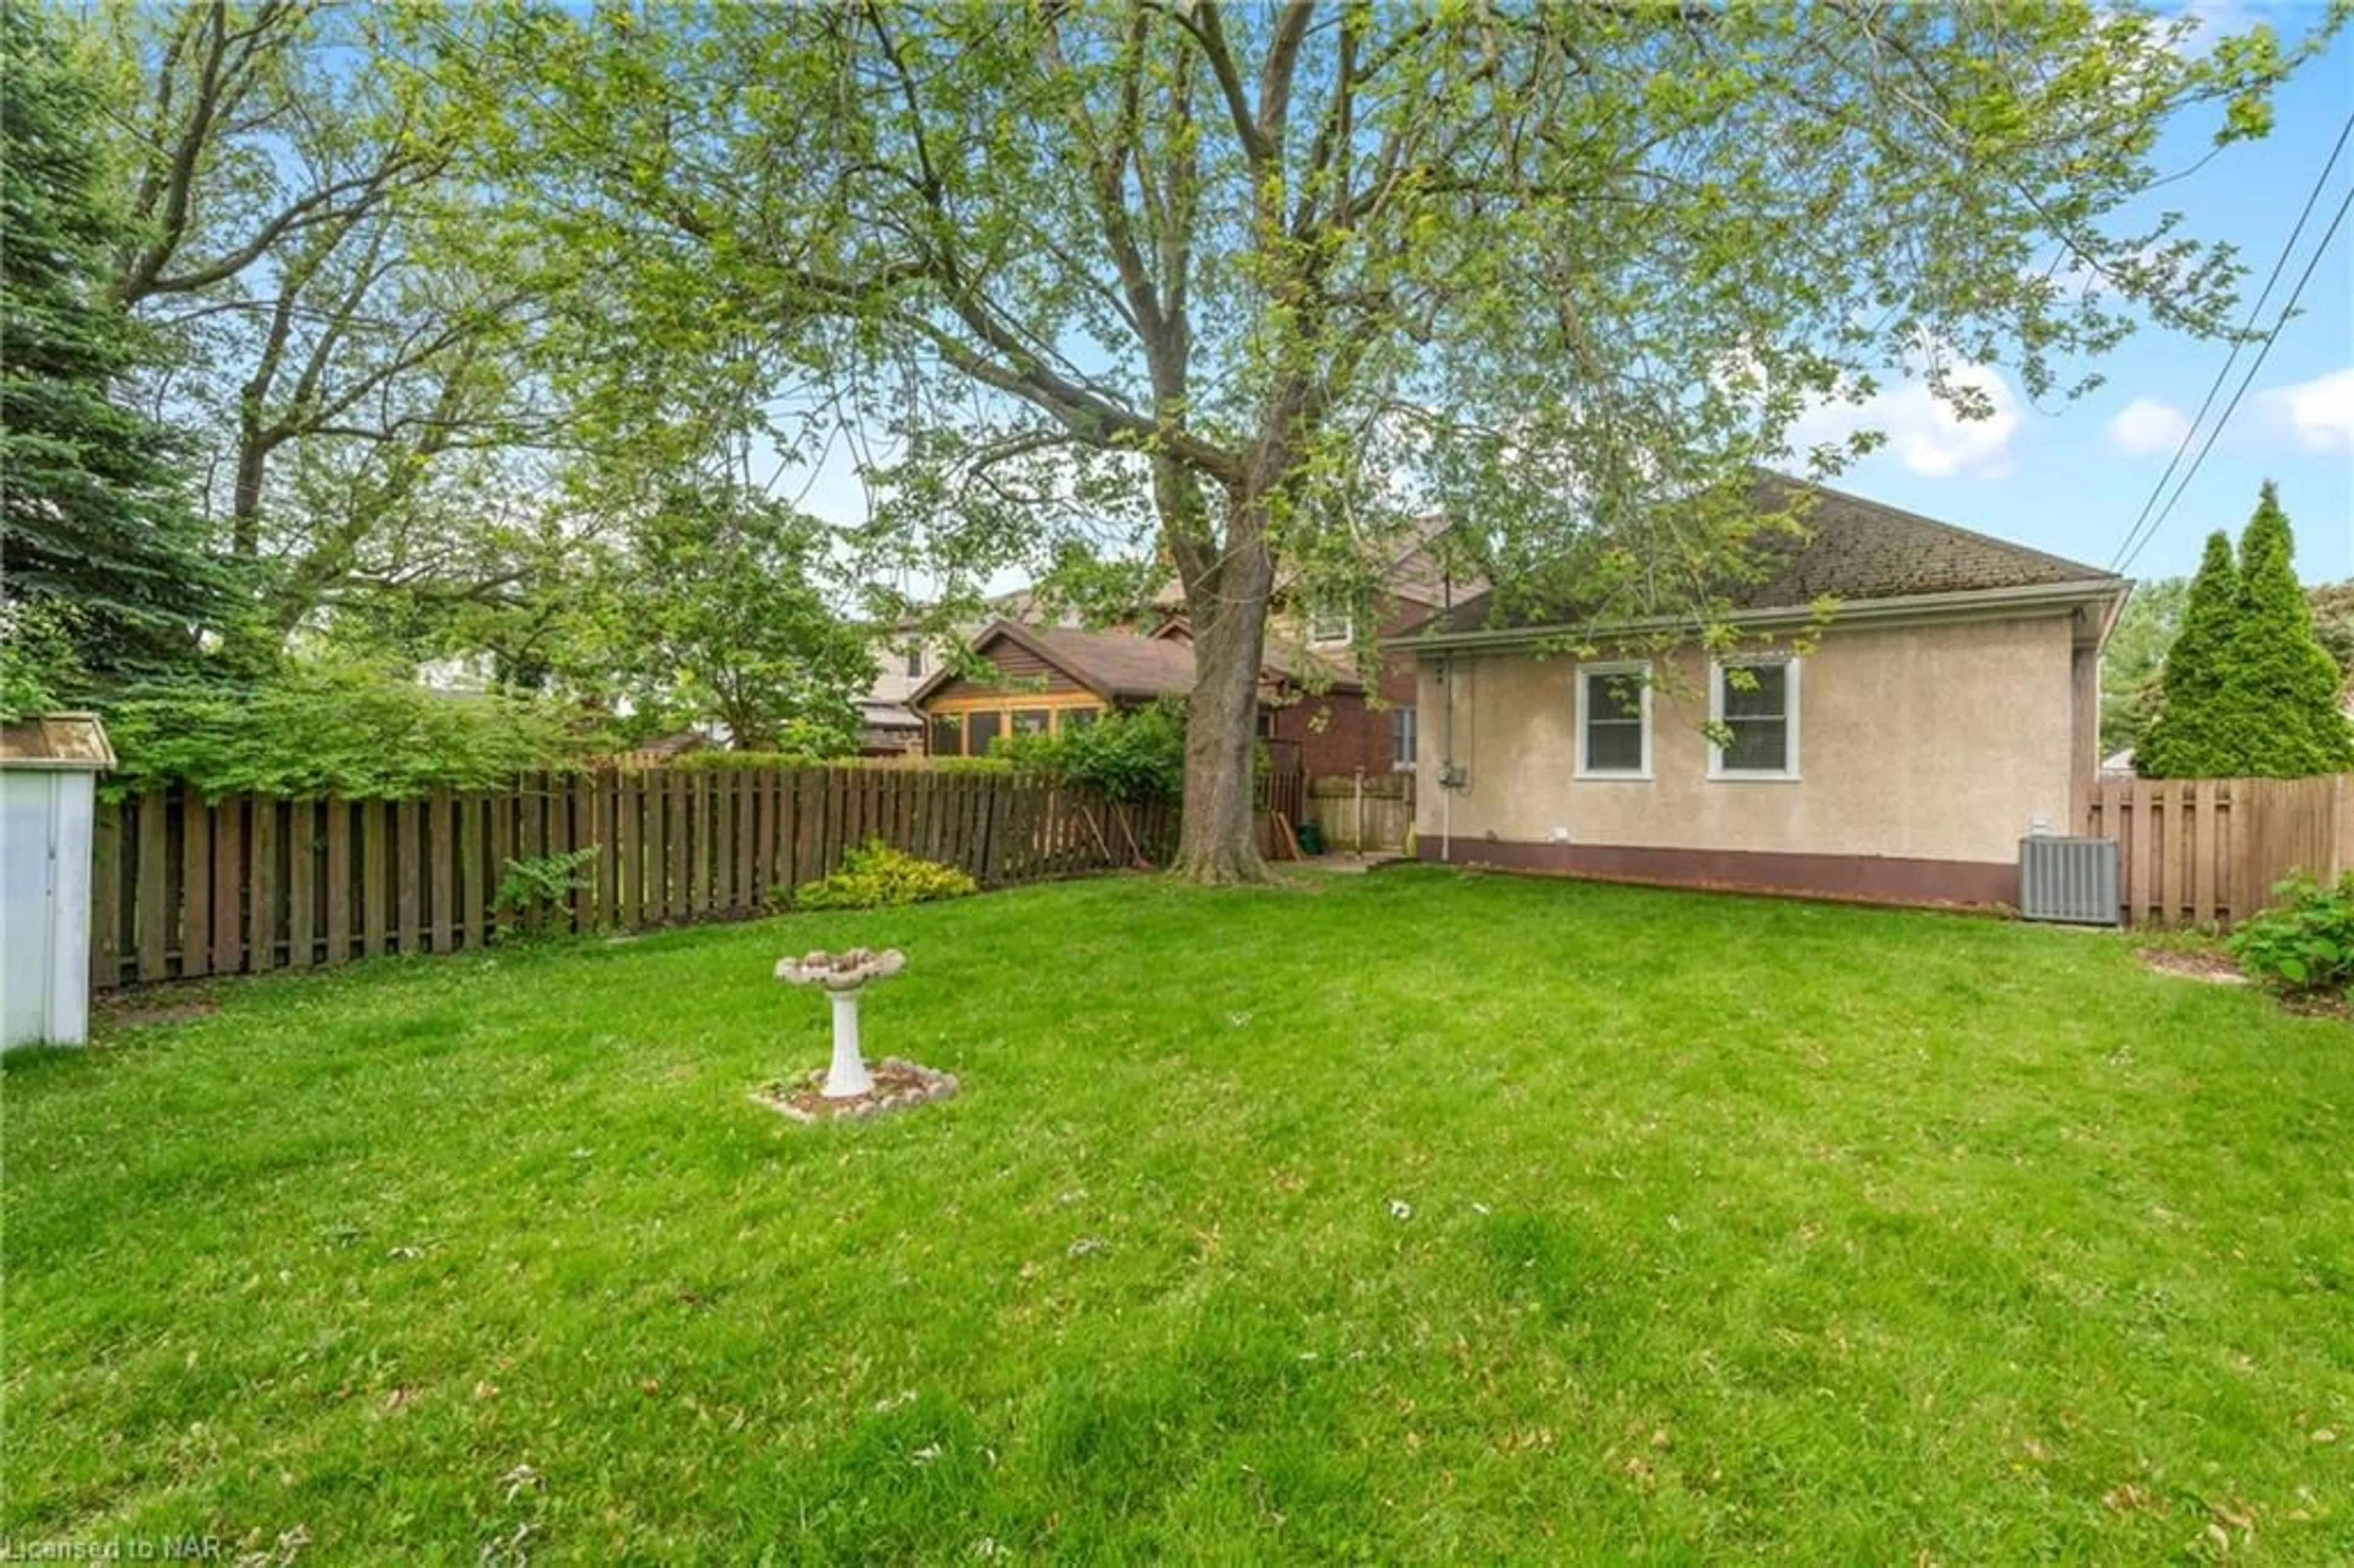 Fenced yard for 149 South Dr, St. Catharines Ontario L2R 4W3